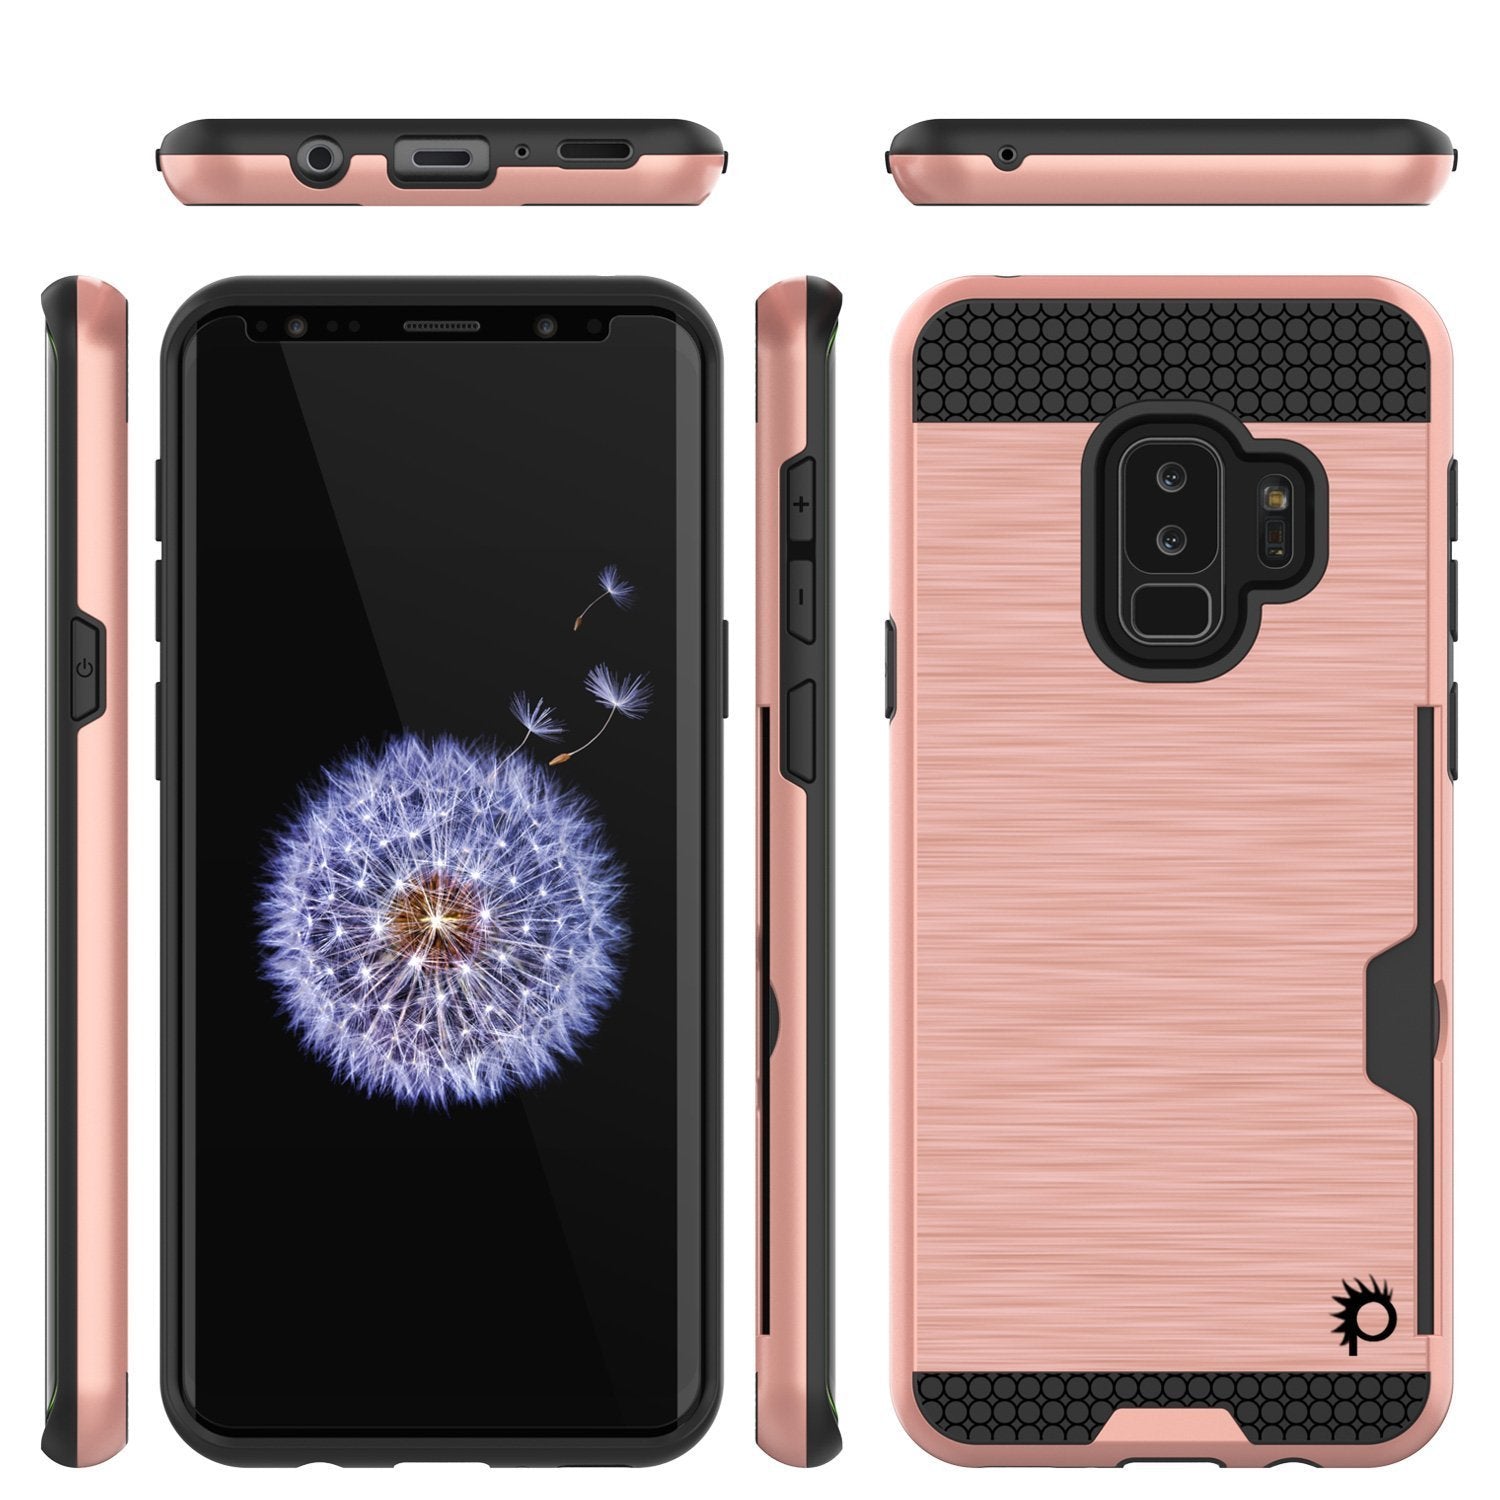 Galaxy S9 Plus Case, PUNKcase [SLOT Series] [Slim Fit] Dual-Layer Armor Cover w/Integrated Anti-Shock System, Credit Card Slot  [Rose Gold] - PunkCase NZ